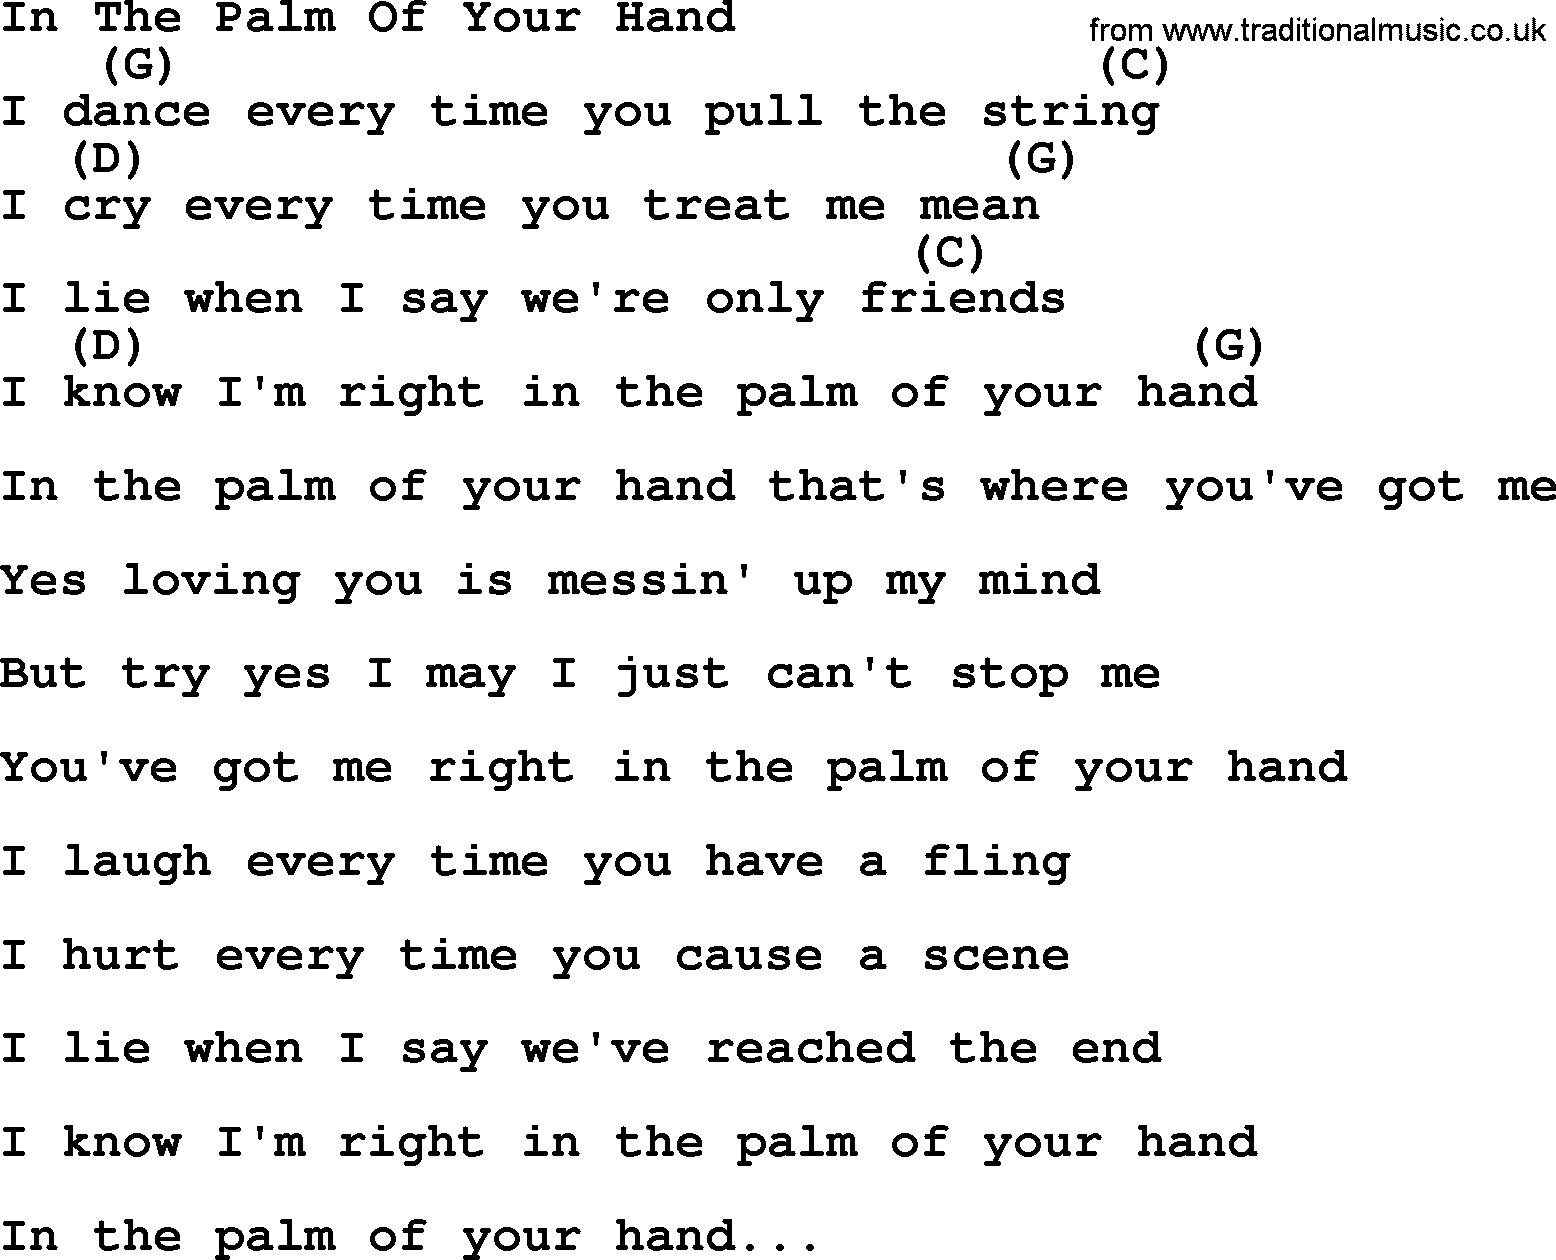 Bluegrass song: In The Palm Of Your Hand, lyrics and chords